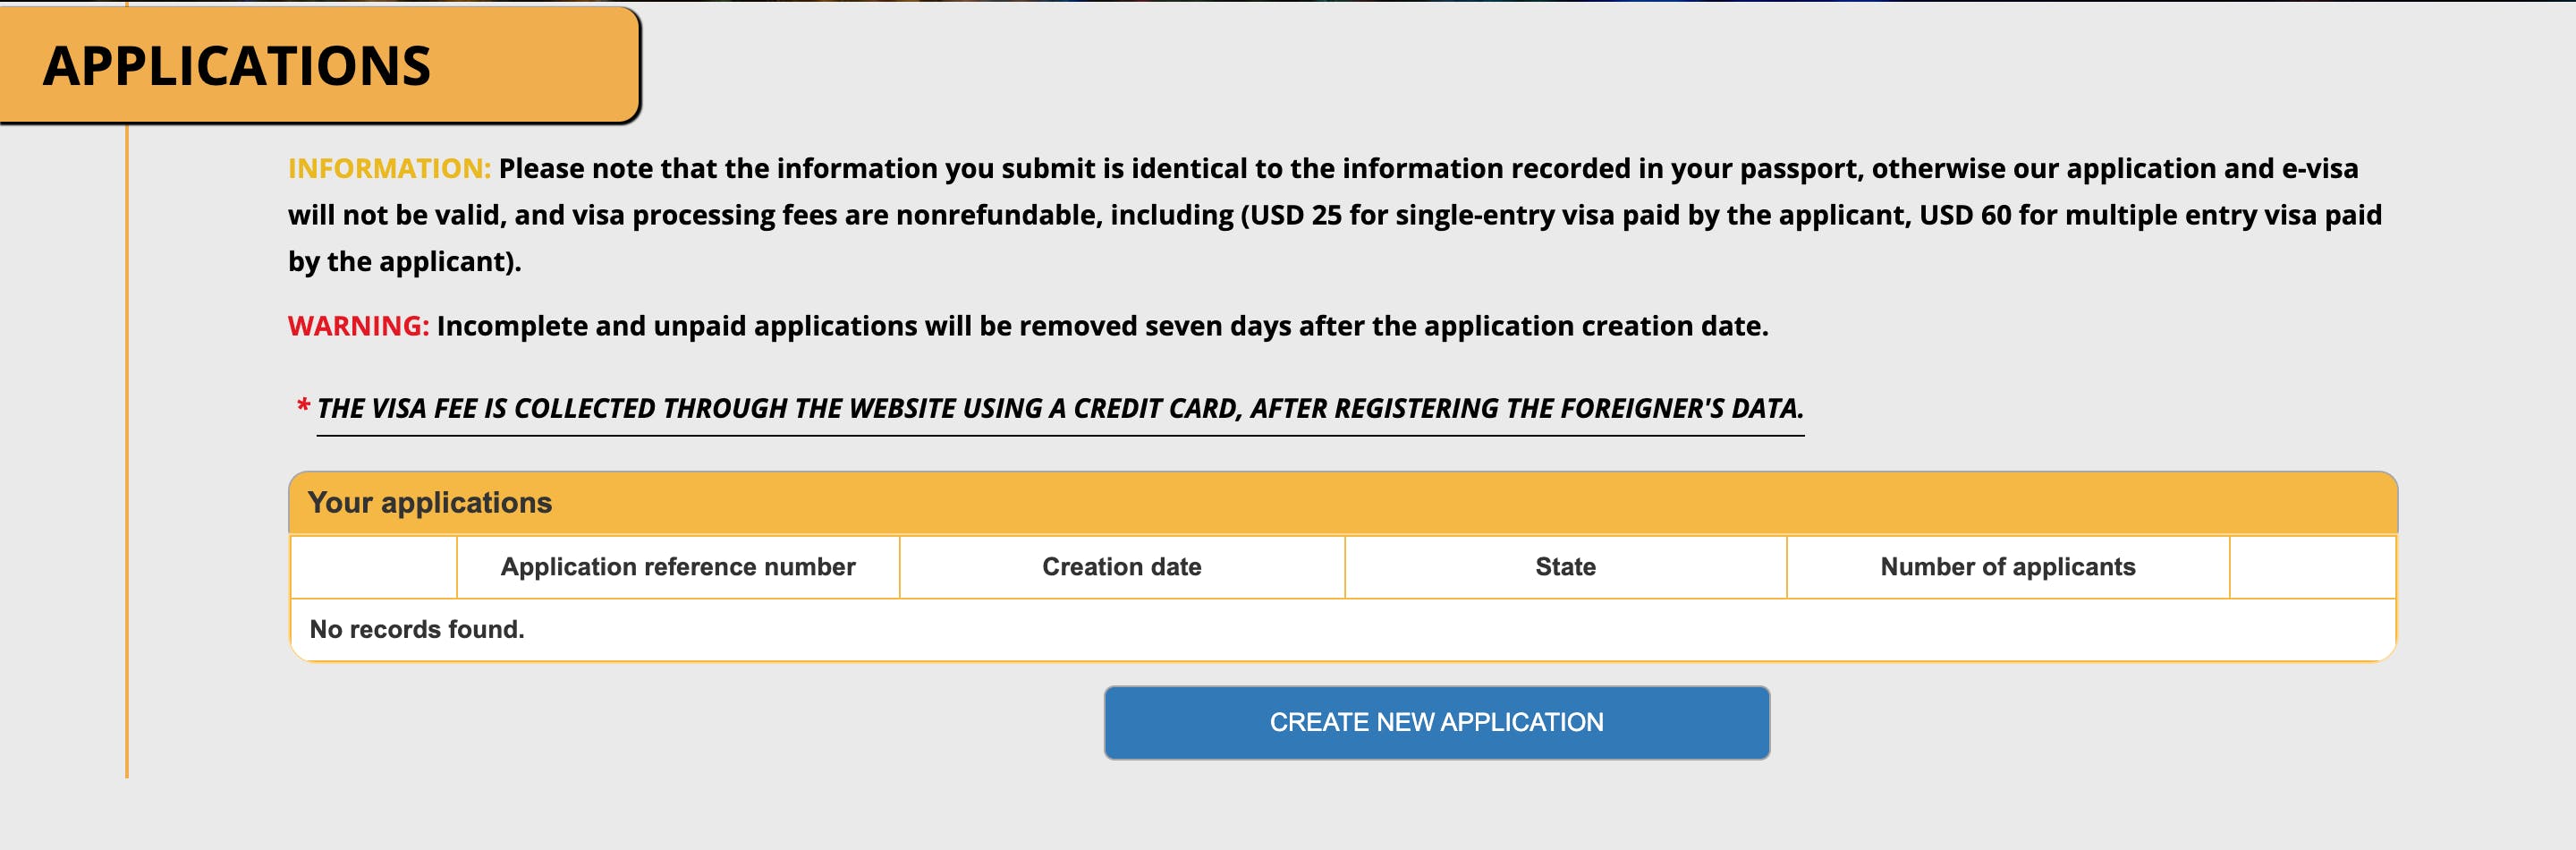 Screenshot of the online visa application process for the Egypt e visa for Indians